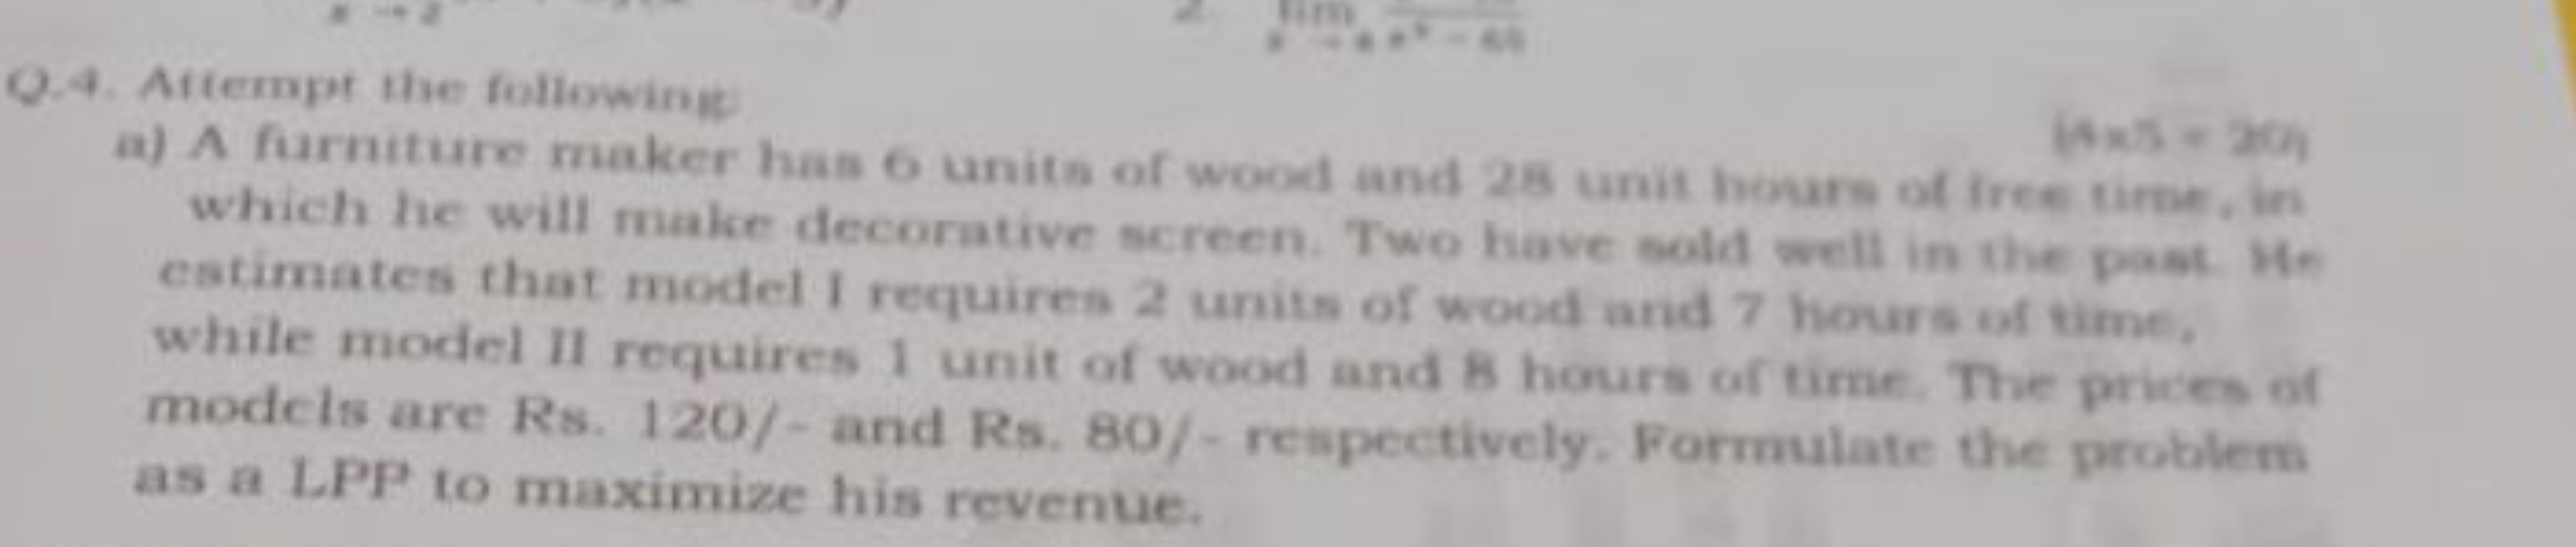 Q.4. Aftempt the following
a) A furniture maker has 6 units of wood an